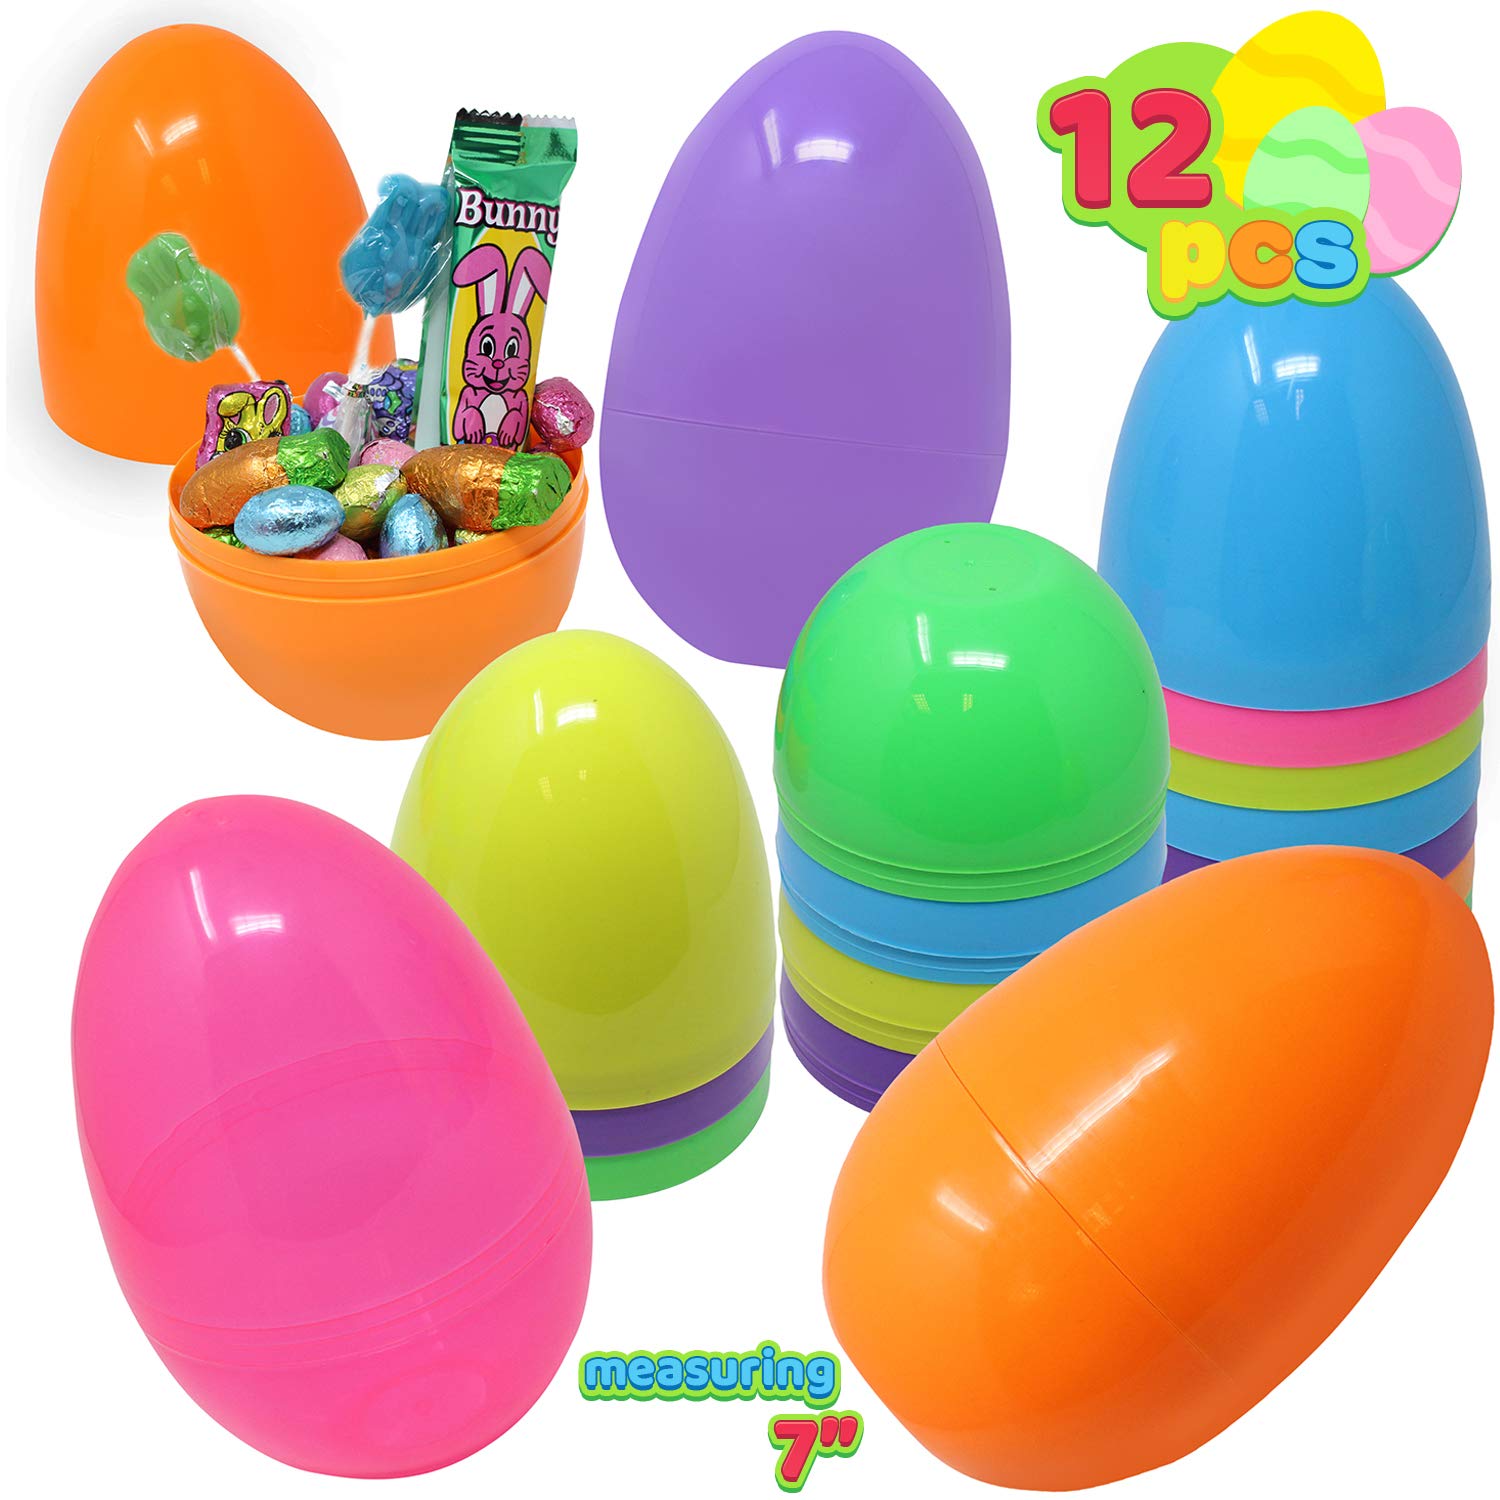 JOYIN 12 Pieces 7" Jumbo Plastic Bright Solid Easter Eggs Assorted Colors for Filling Treats, Easter Theme Party Favor, Easter Eggs Hunt, Basket Stuffers Fillers, Classroom Prize Supplies Toy - image 2 of 6